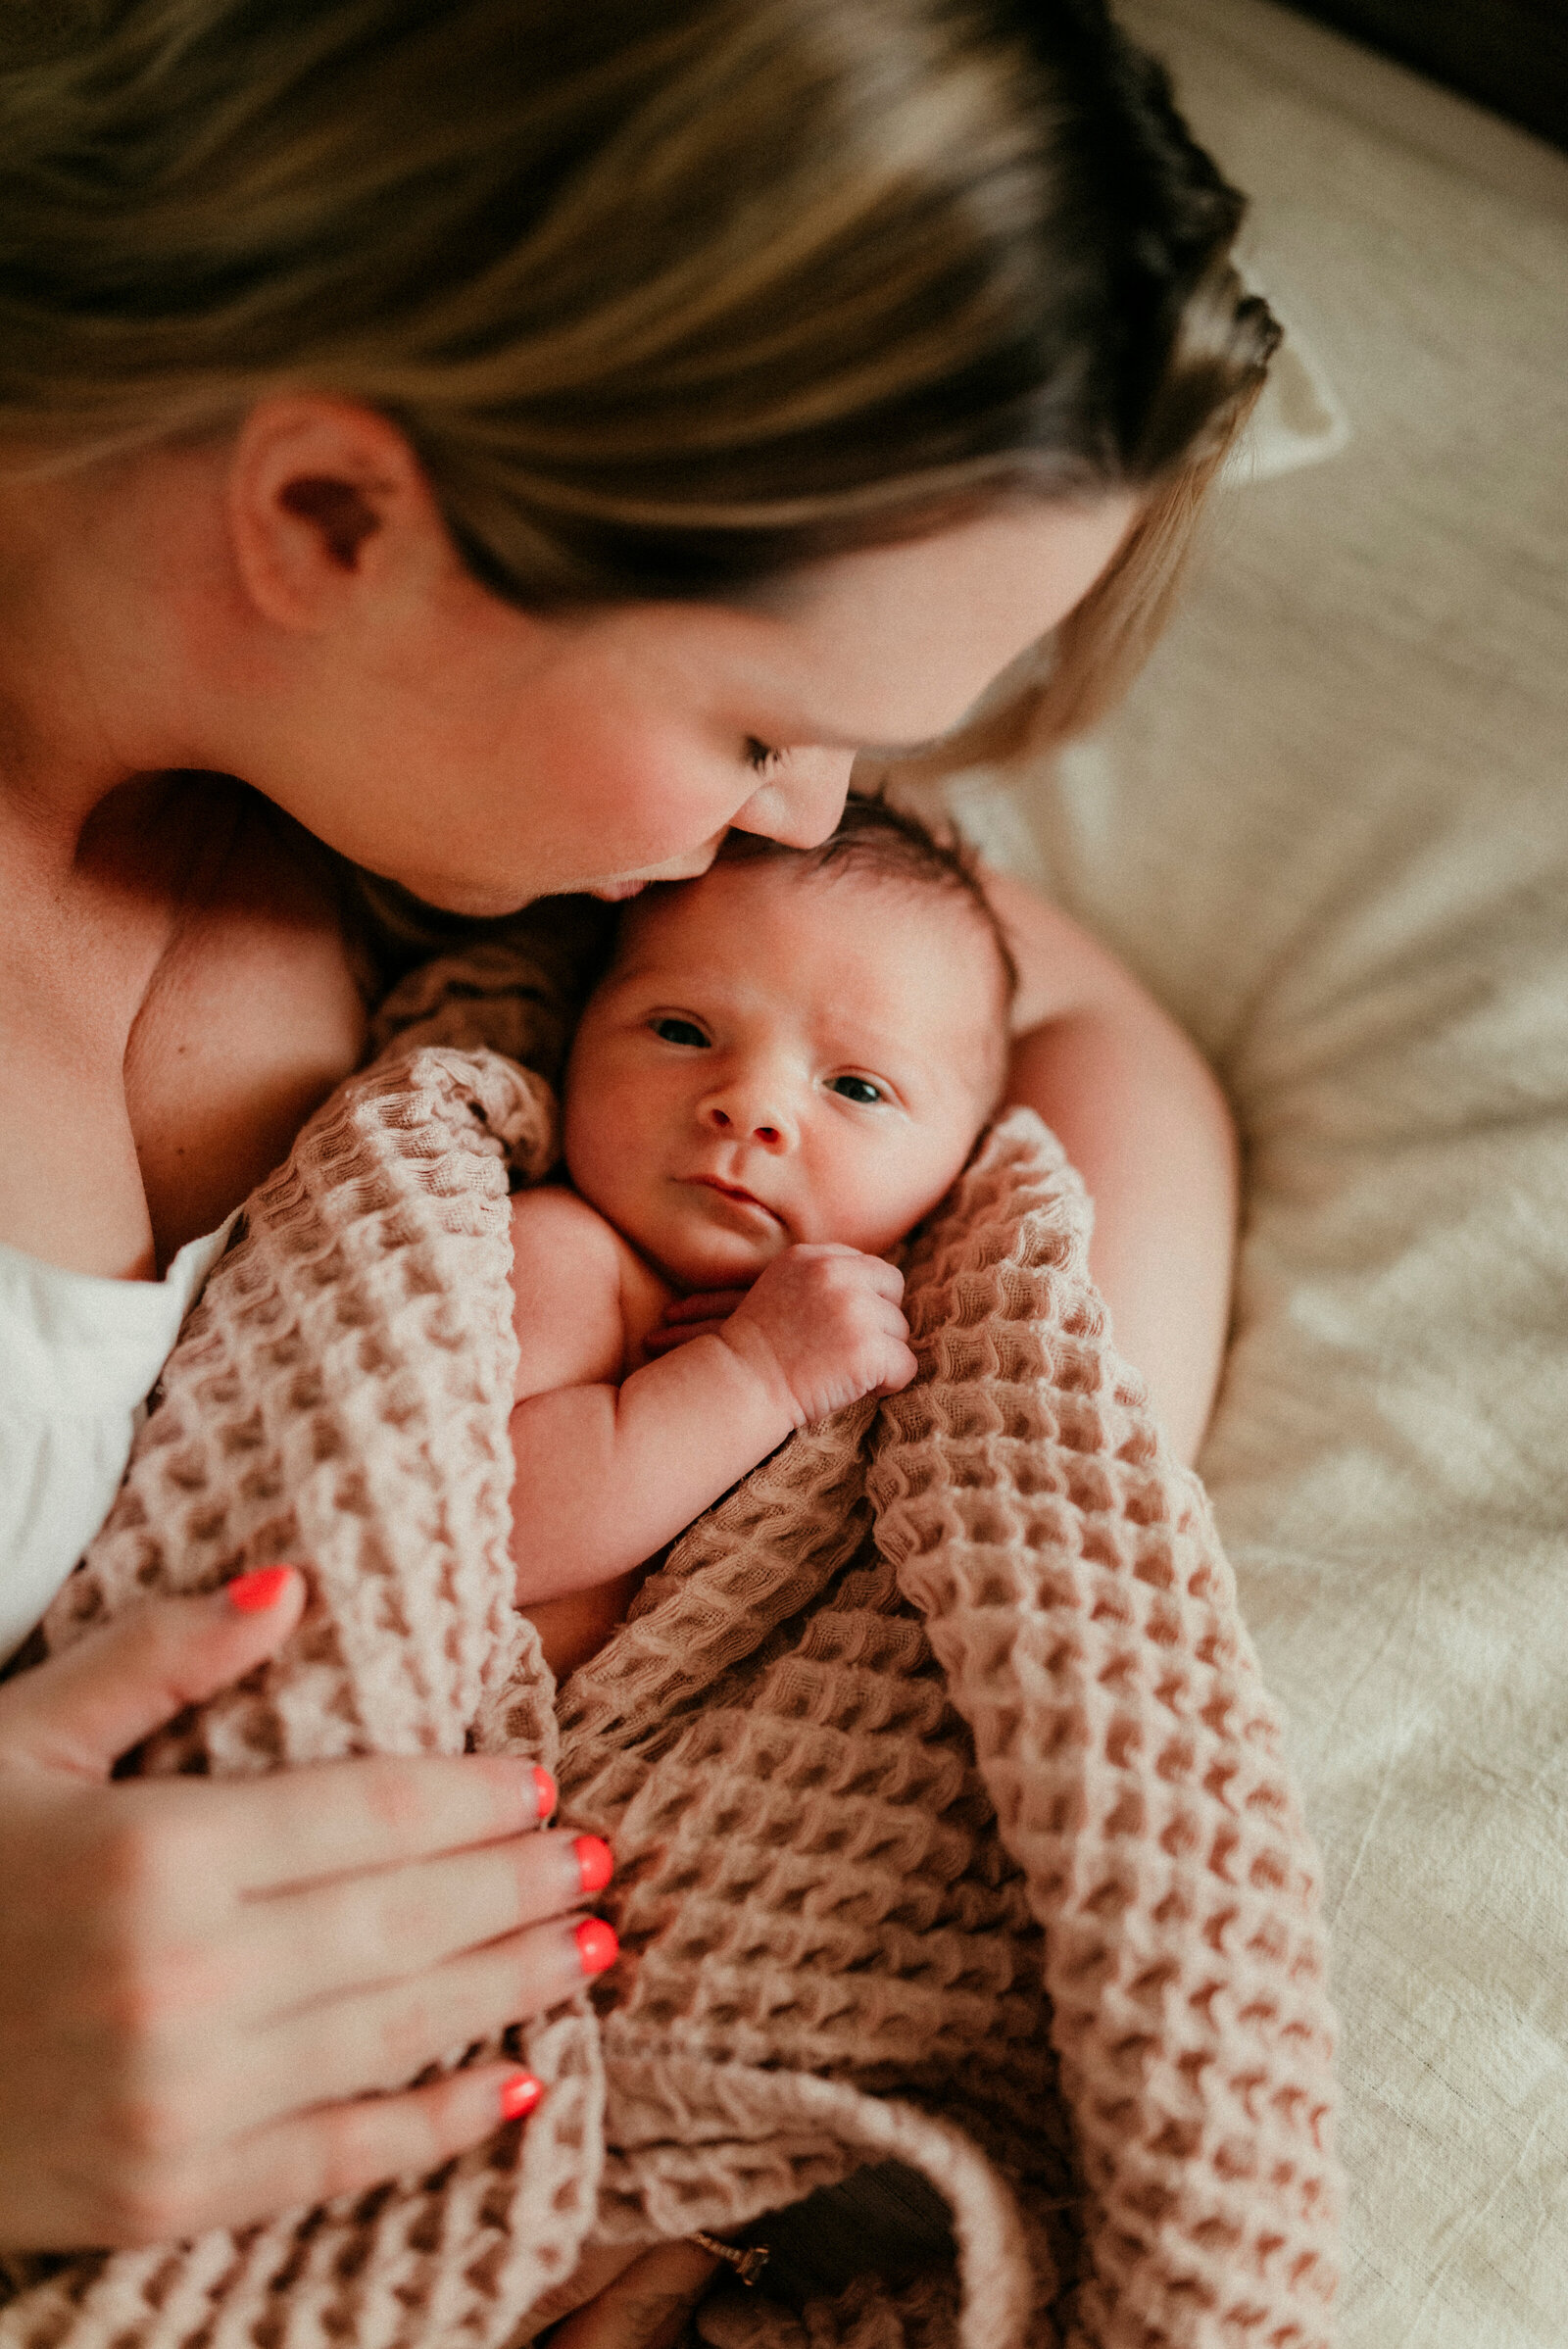 Awaken innocent dreams in the Twin Cities. Shannon Kathleen Photography crafts newborn sessions for timeless memories in St. Paul or Minneapolis. Book your session now